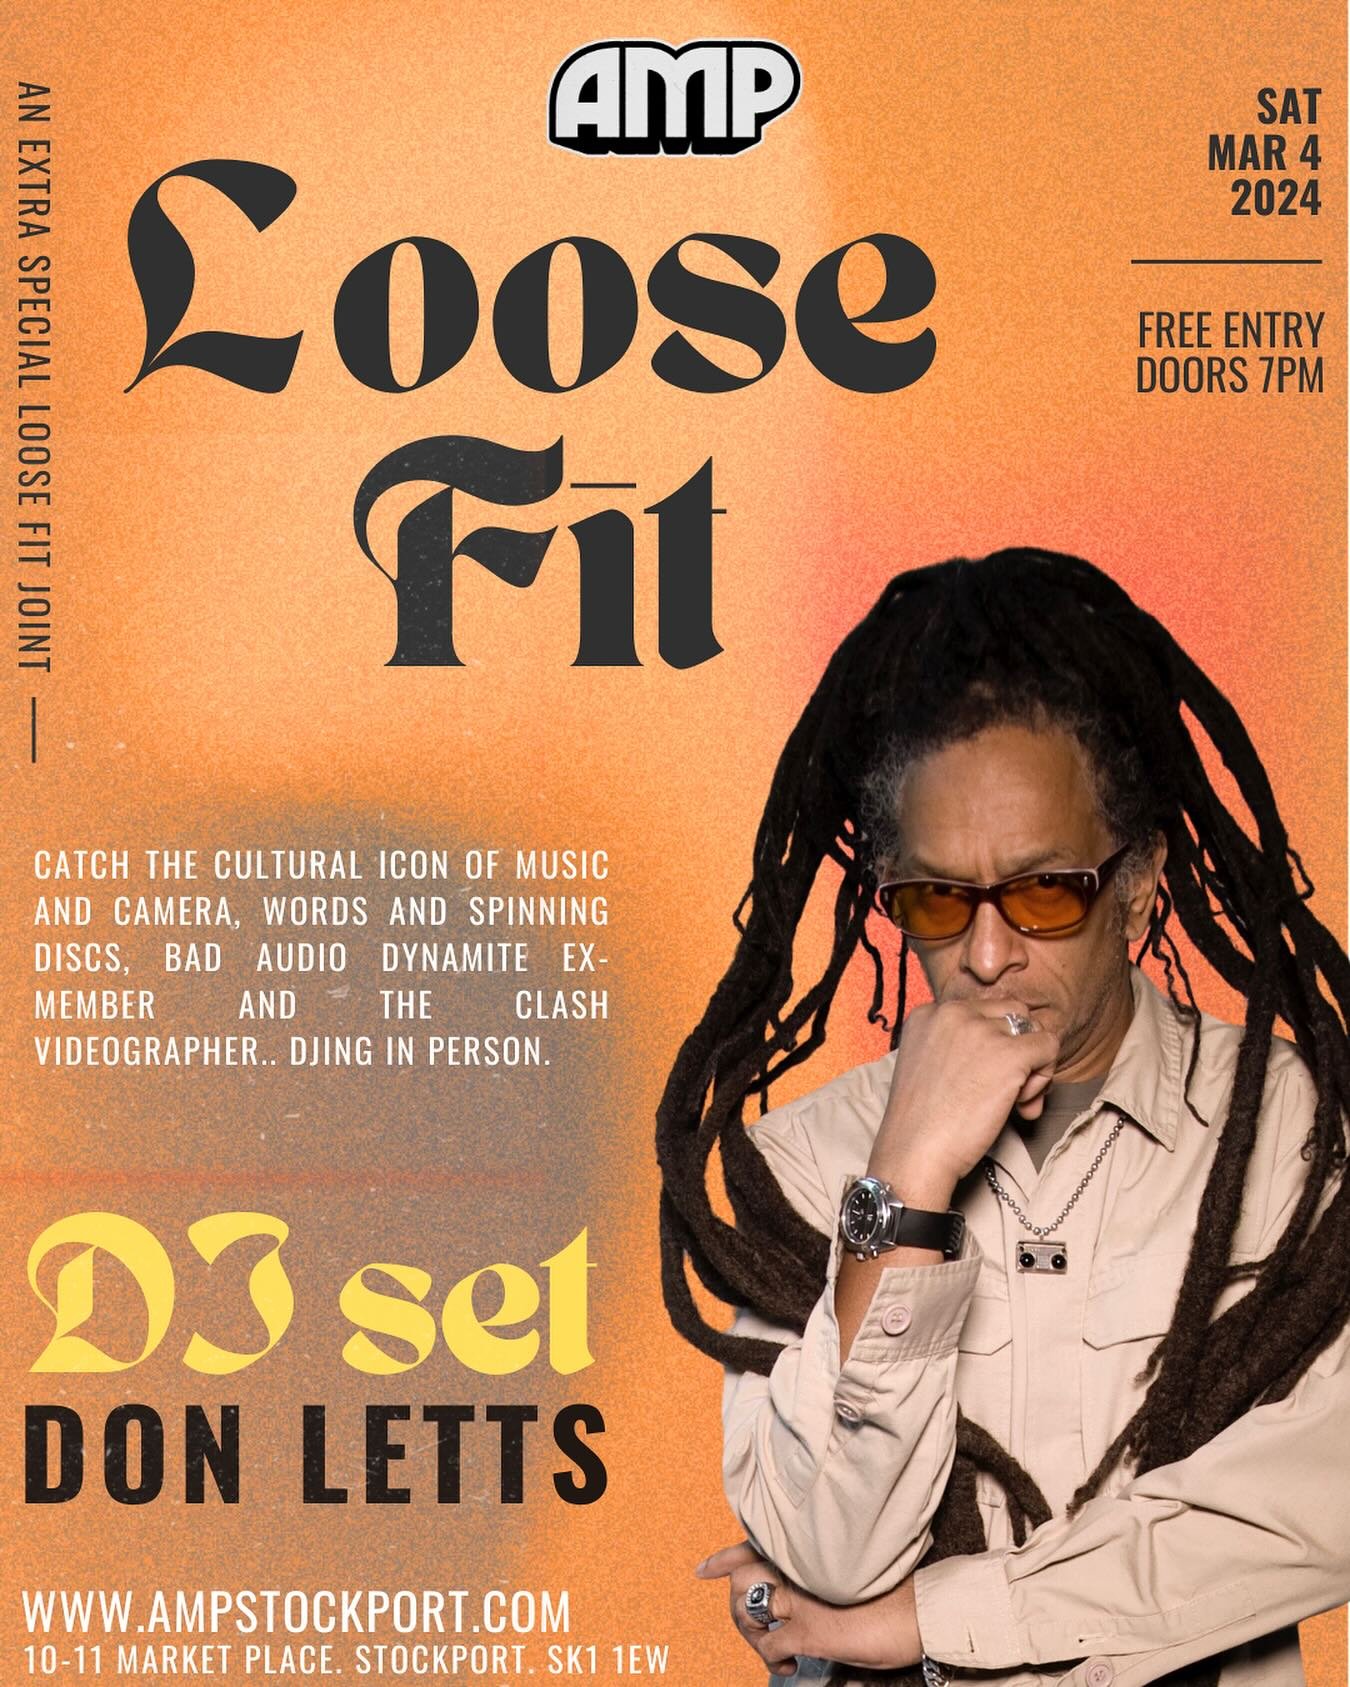 THIS SATURDAY we have the almighty and absolutely legendary DJ, Artist, Writer, Photographer (need we carry on&hellip;?) that is @lettsdon DON LETTS!! 
FREE ENTRY! DJ set from 9pm 
#donletts #dj #theclash #bigaudiodynamite #music #loosefit #stockport